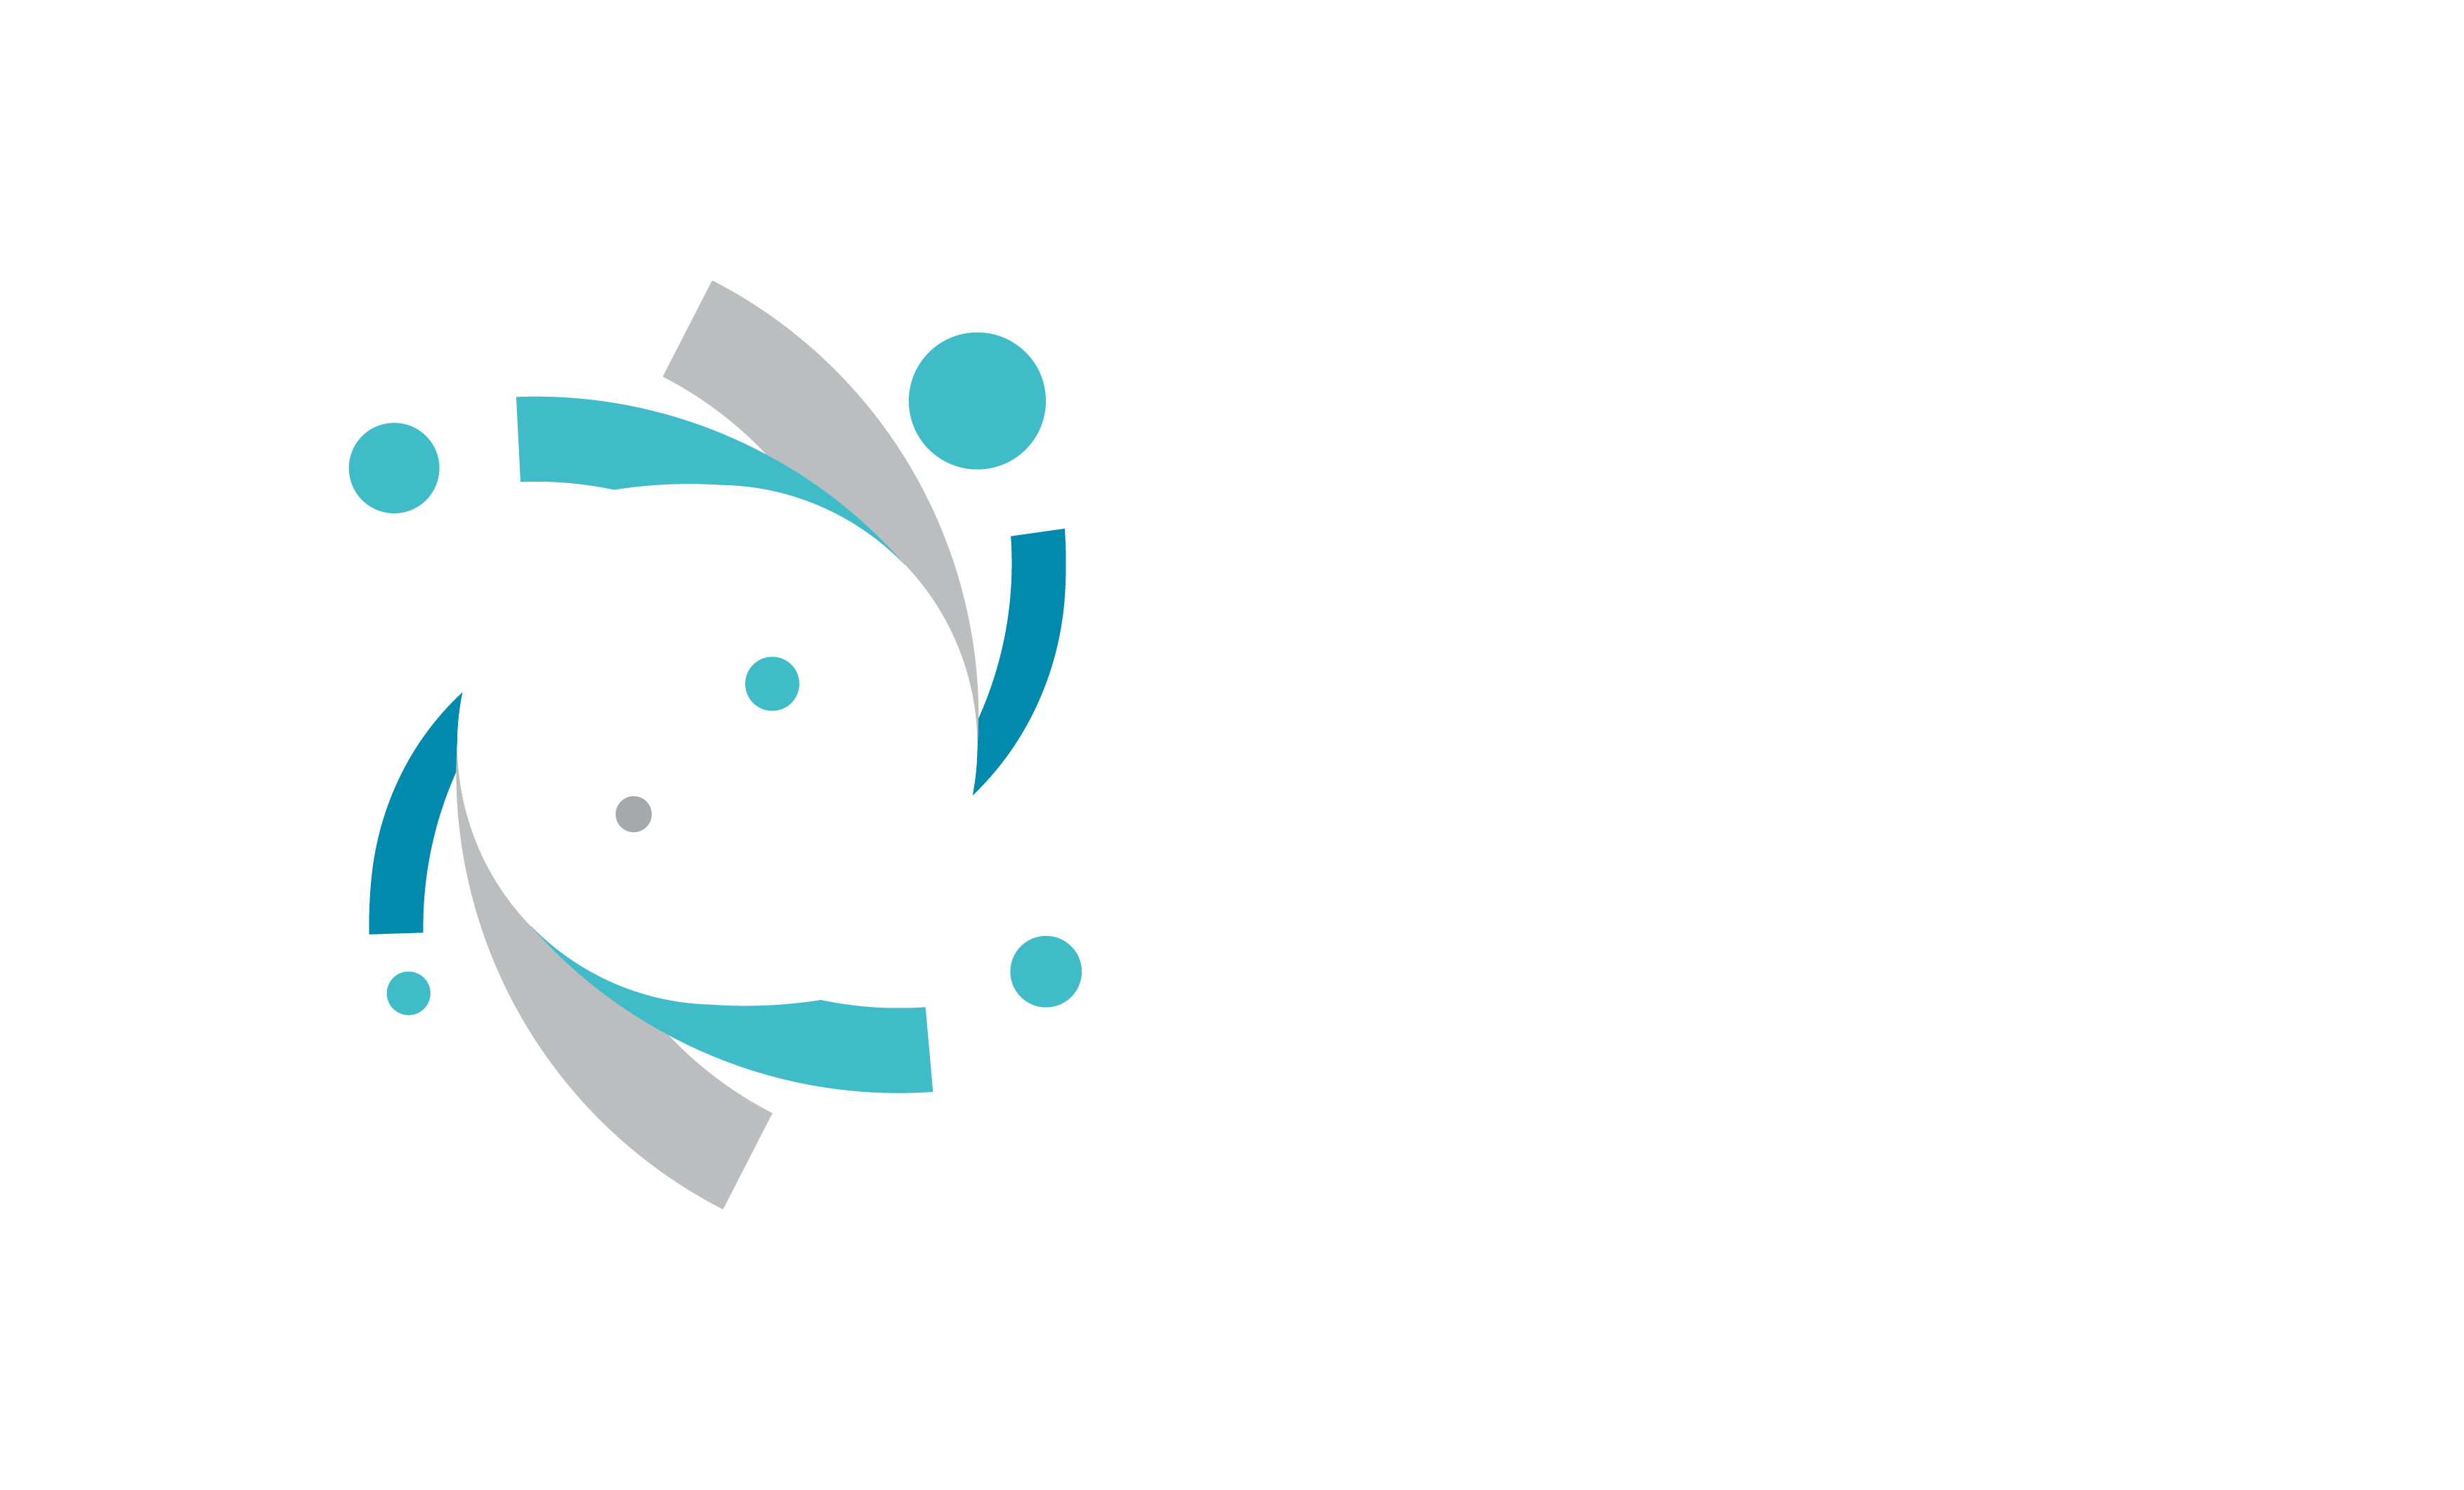 Thailand Hub of Talents in Cancer Immunotherapy (TTCI Thailand)